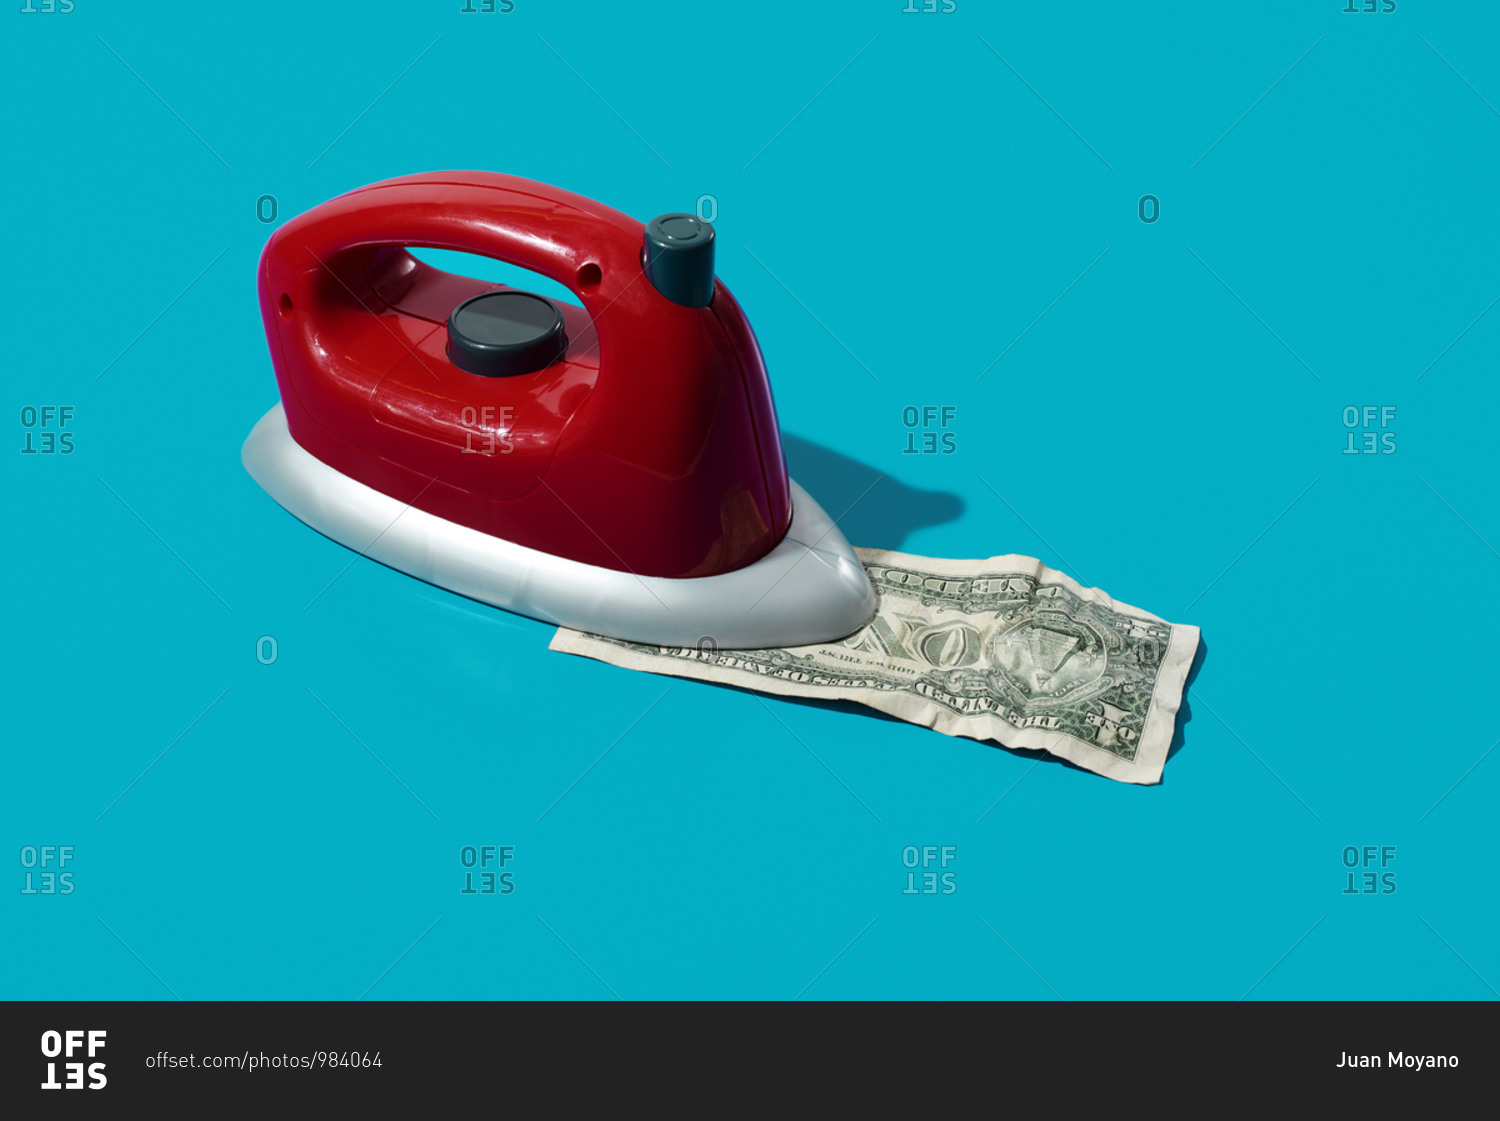 Ironing a dollar with a red iron on a blue background with some blank space